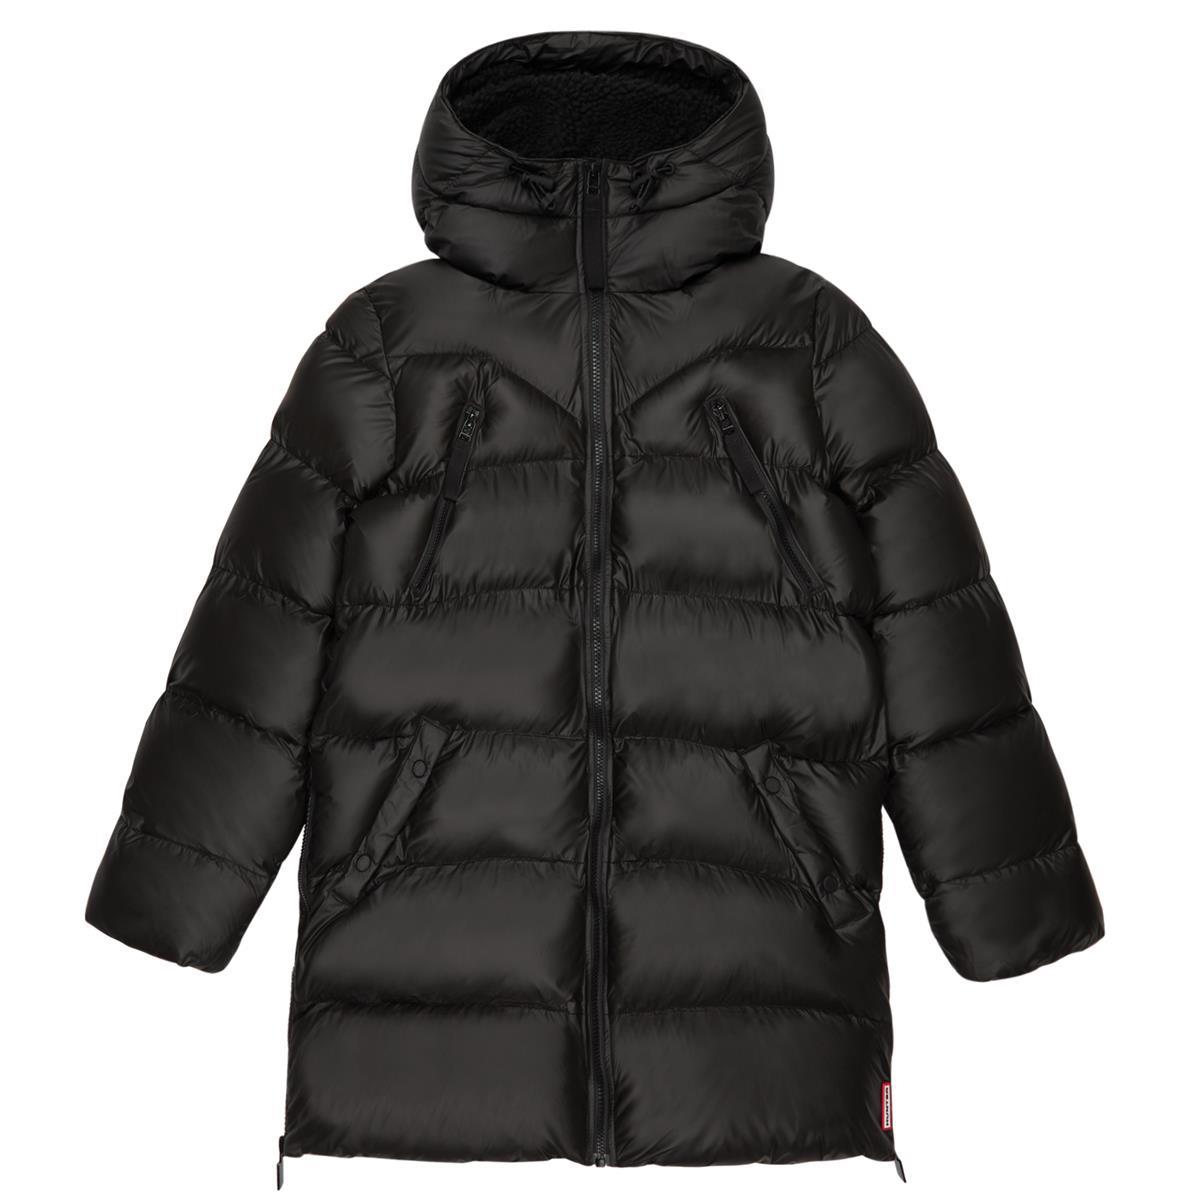 What adjustable feature does the Hunter puffer jacket include?